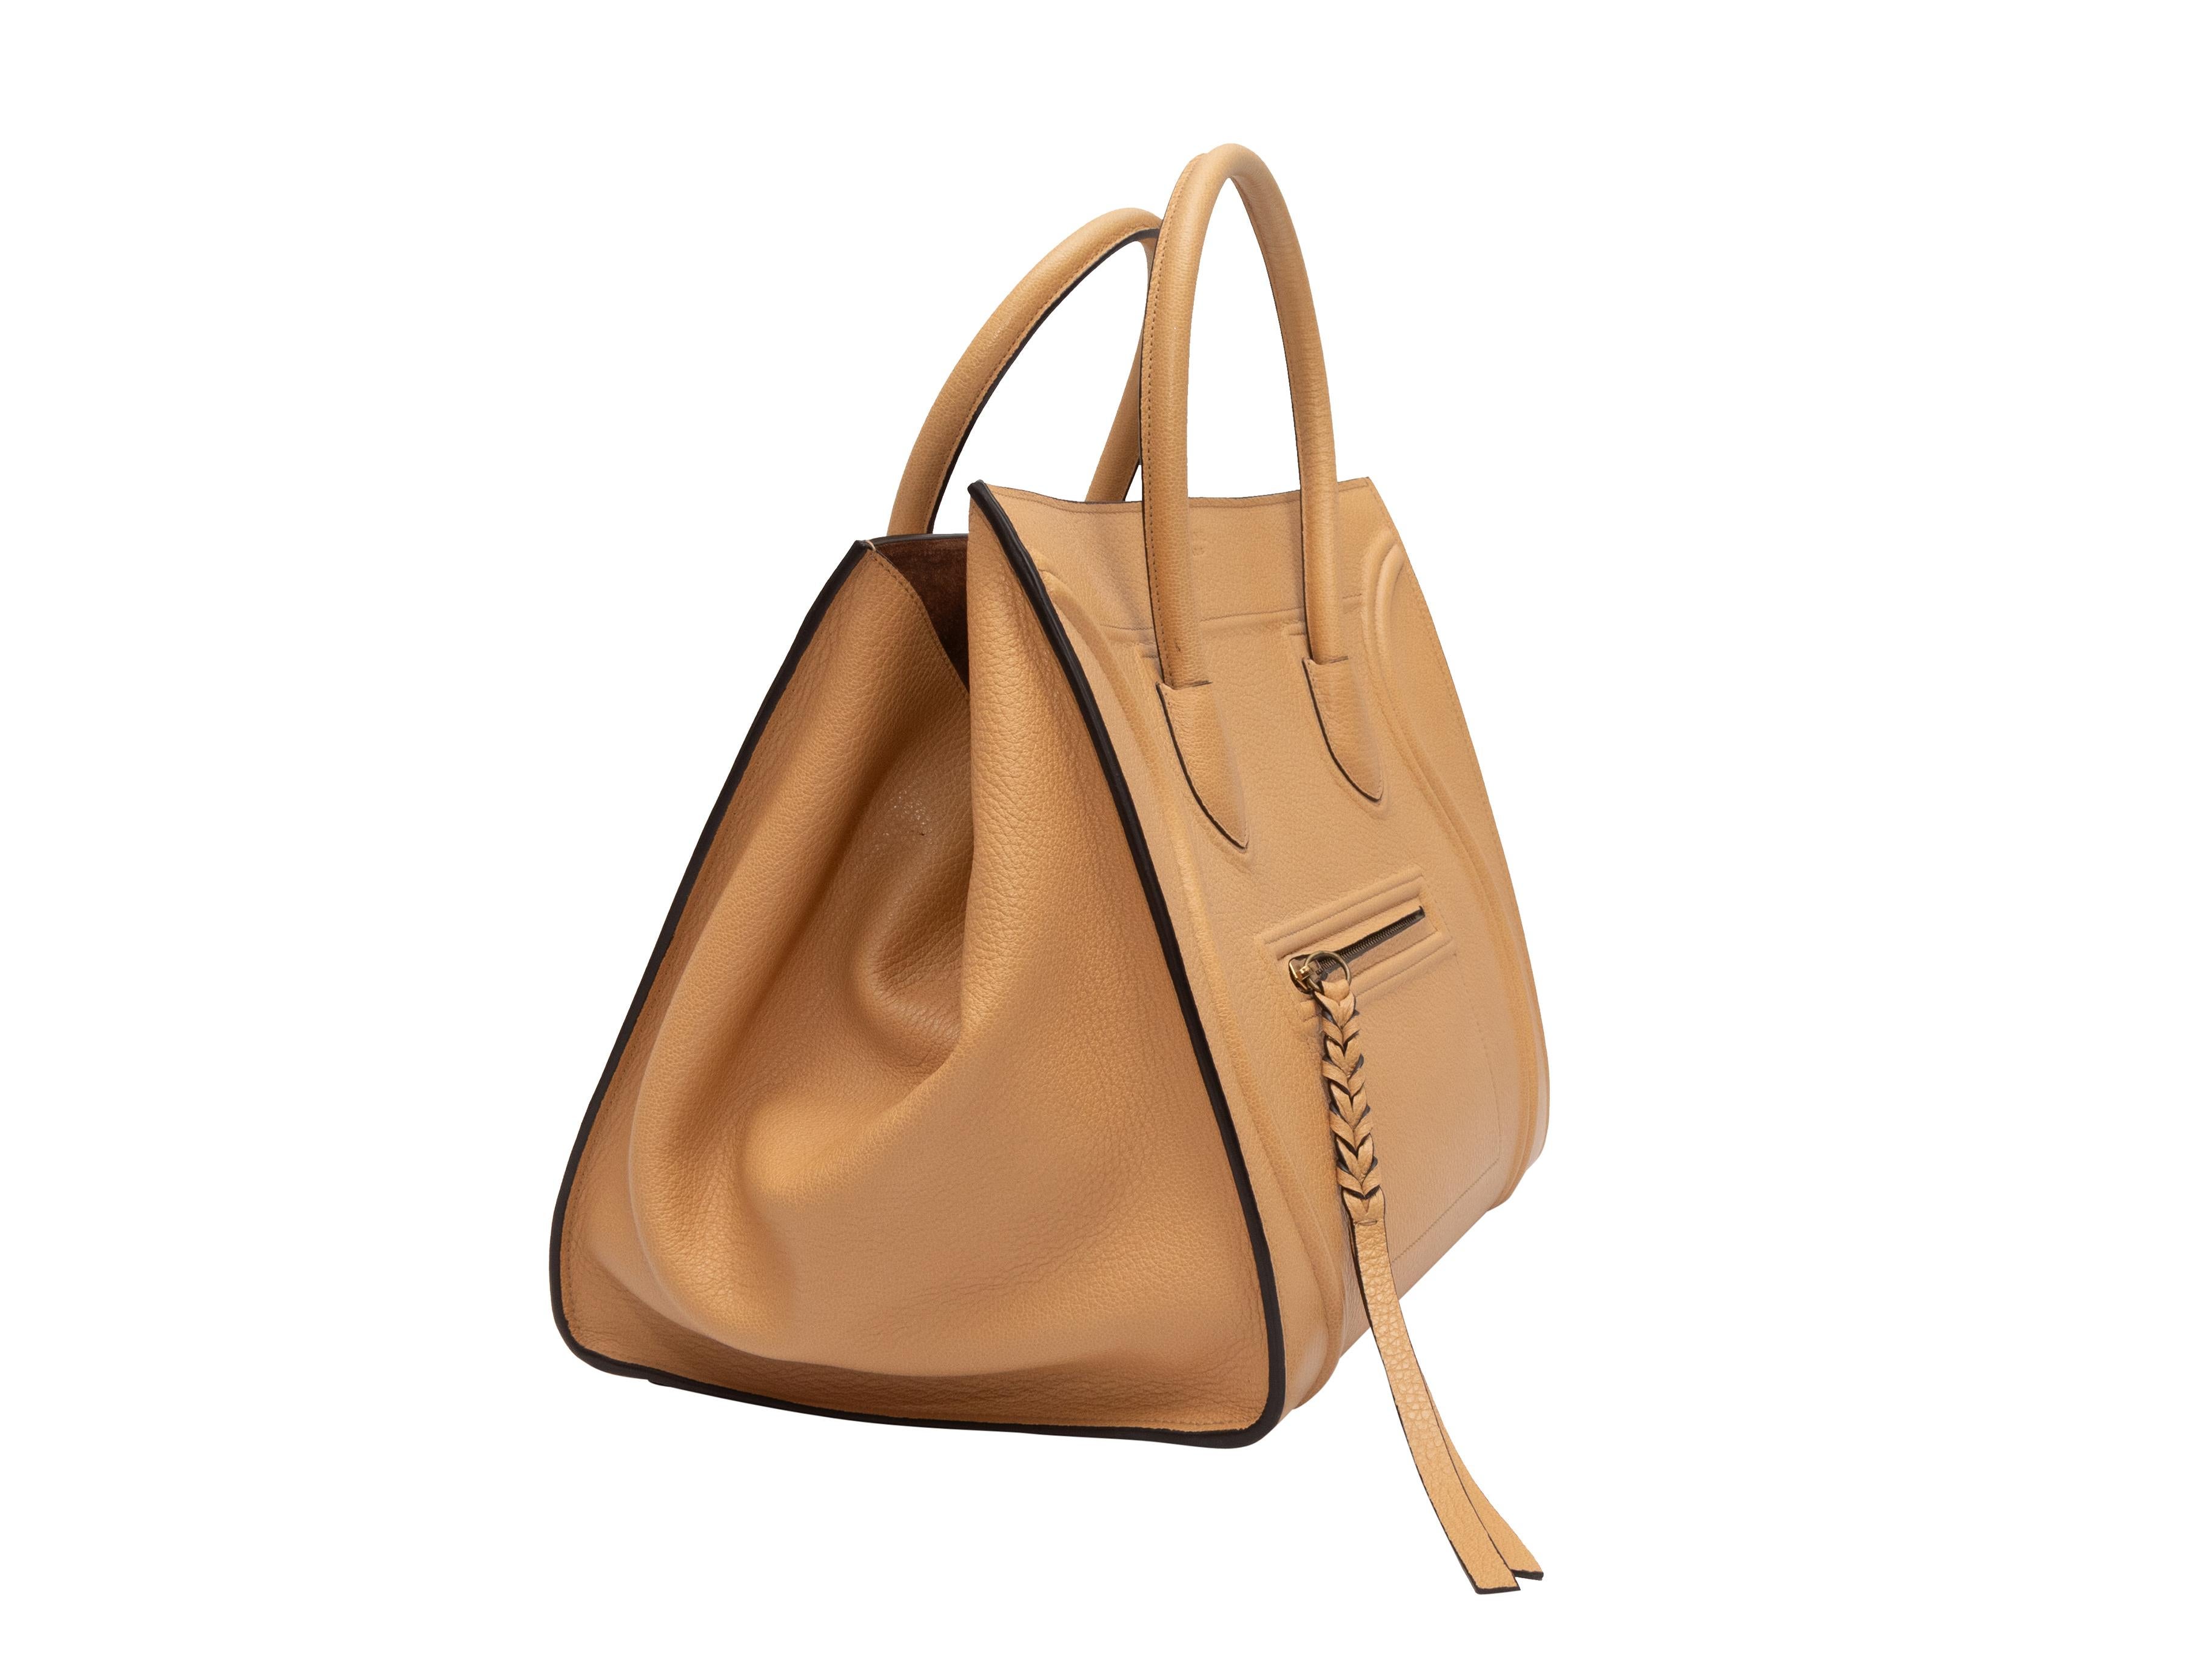 Product Details: Tan Celine Leather Phantom Luggage Bag. The Phantom bag features a leather body, gold-tone hardware, an interior zip pocket, a front zip closure pocket, dual rolled top handles, and a top closure. 11.5